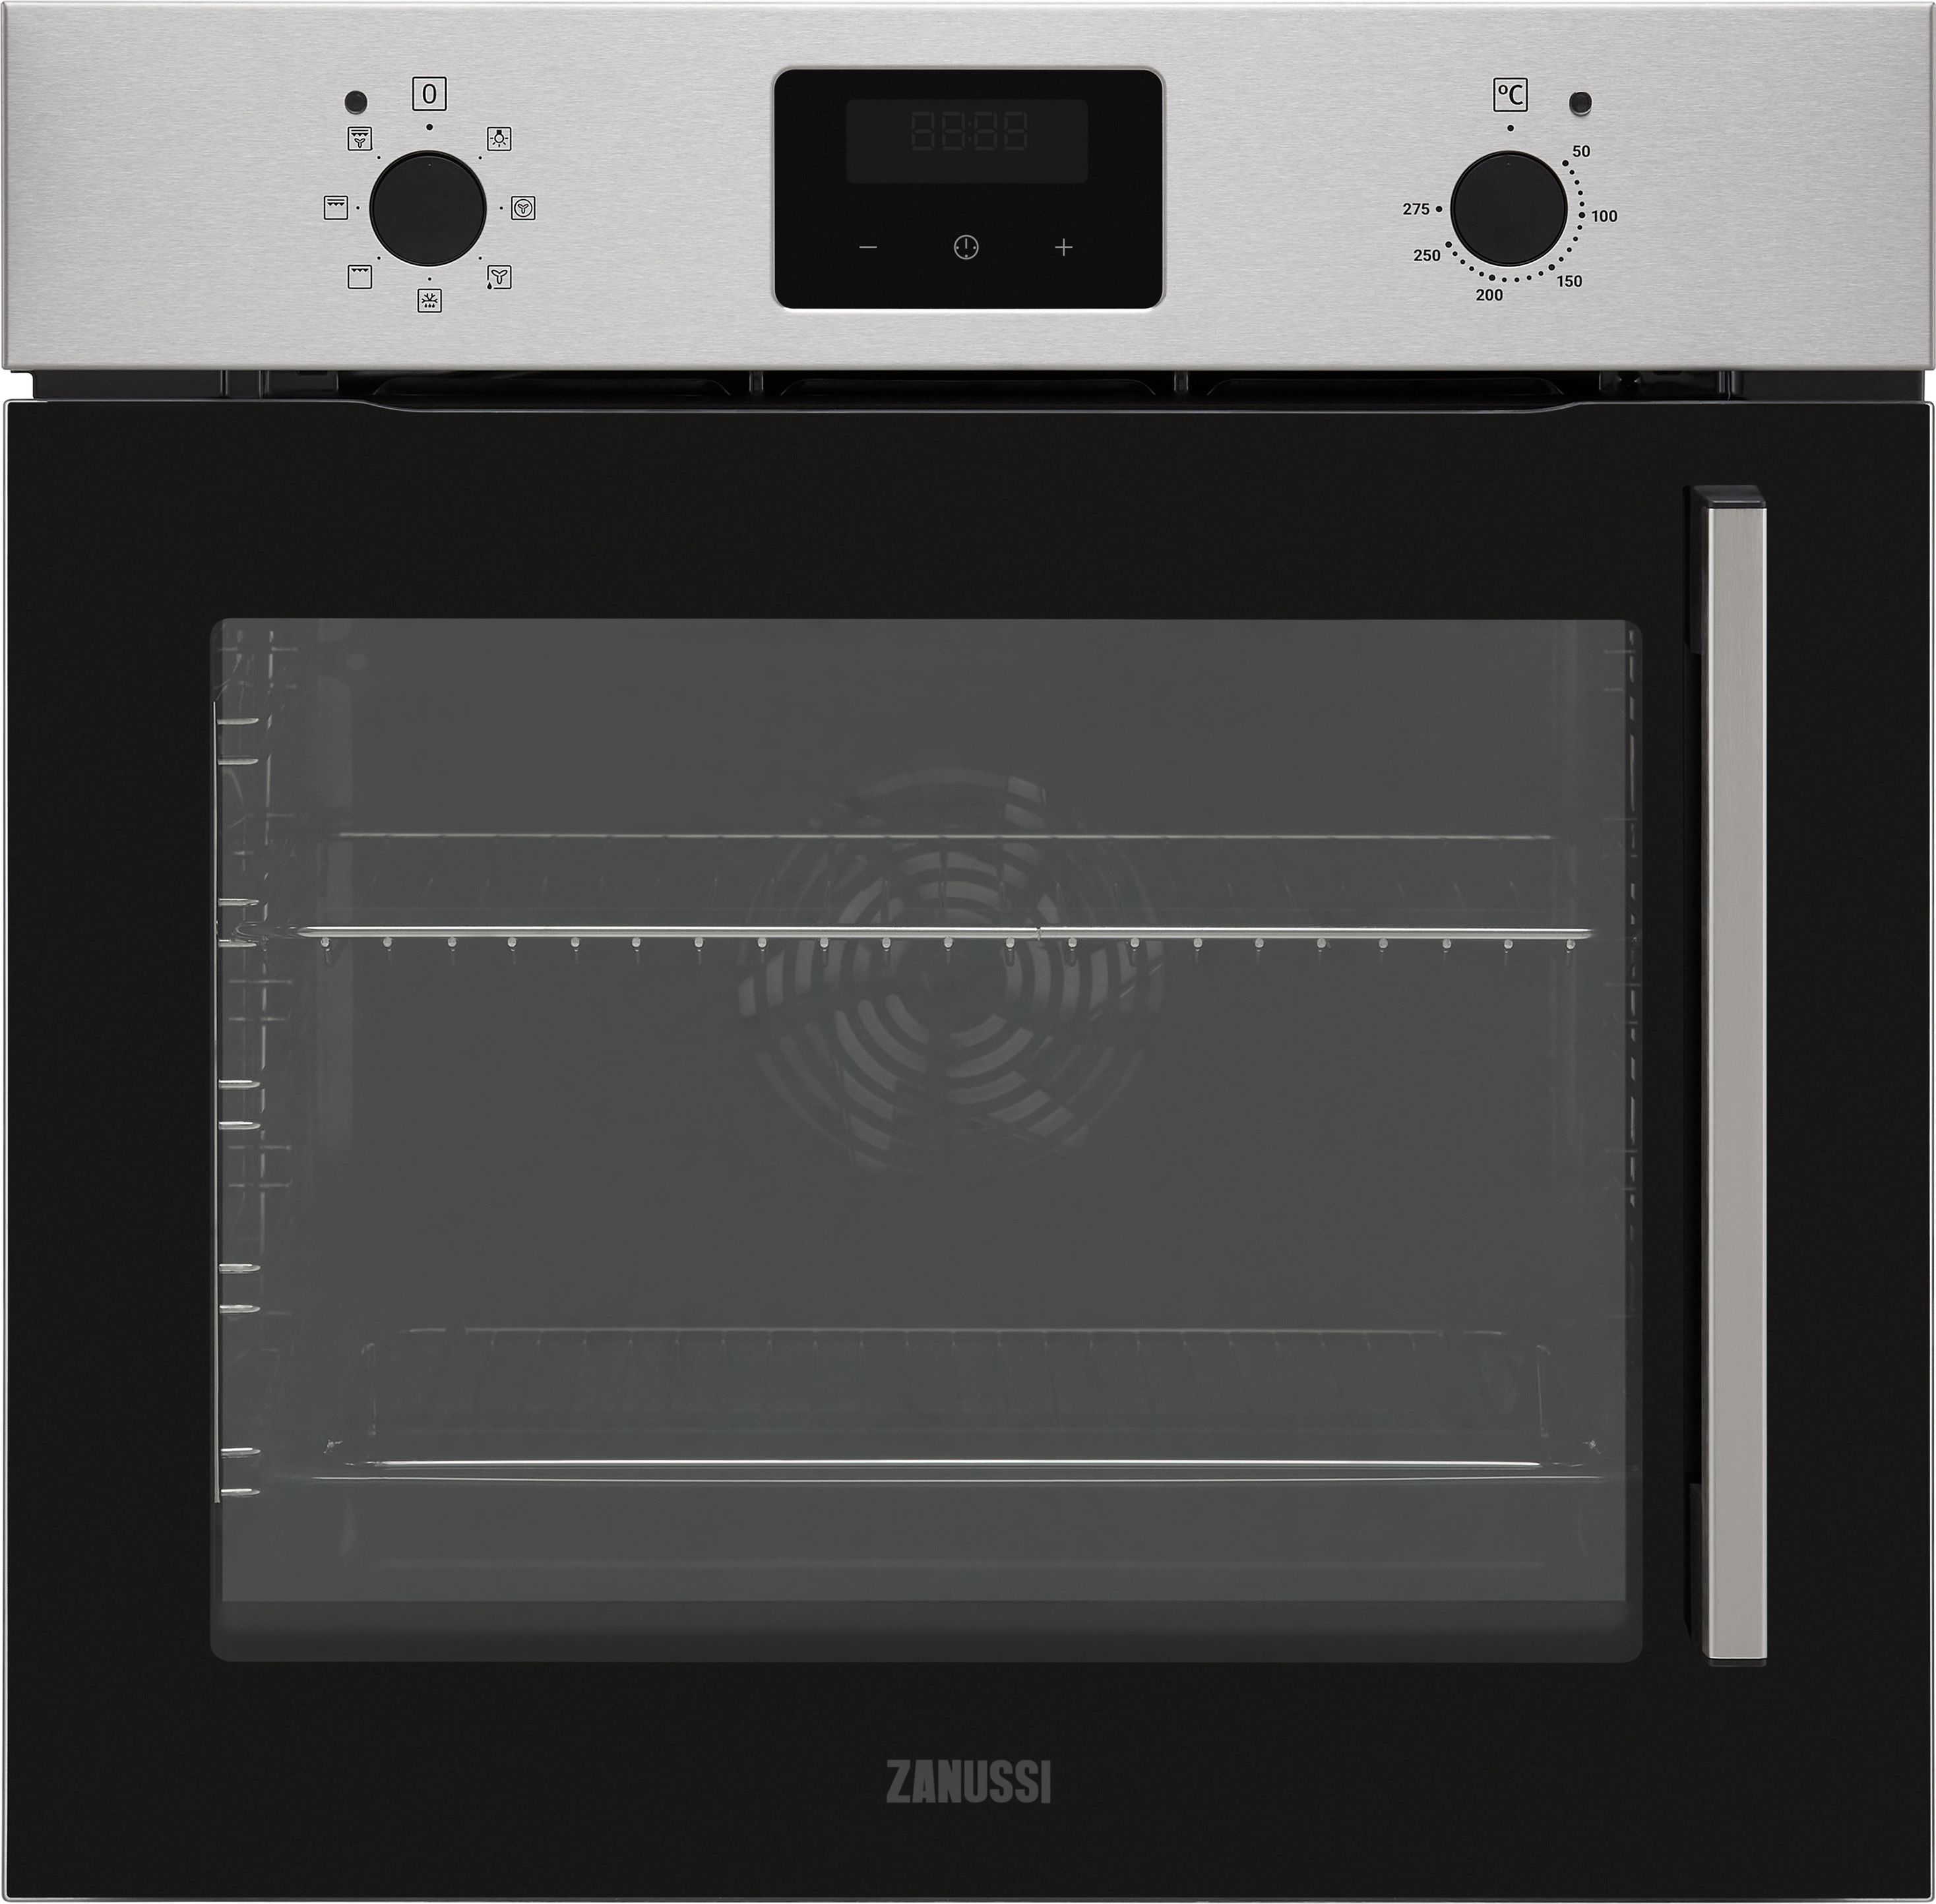 Zanussi ZOCNX3XL Built In Electric Single Oven - Stainless Steel - A Rated, Stainless Steel